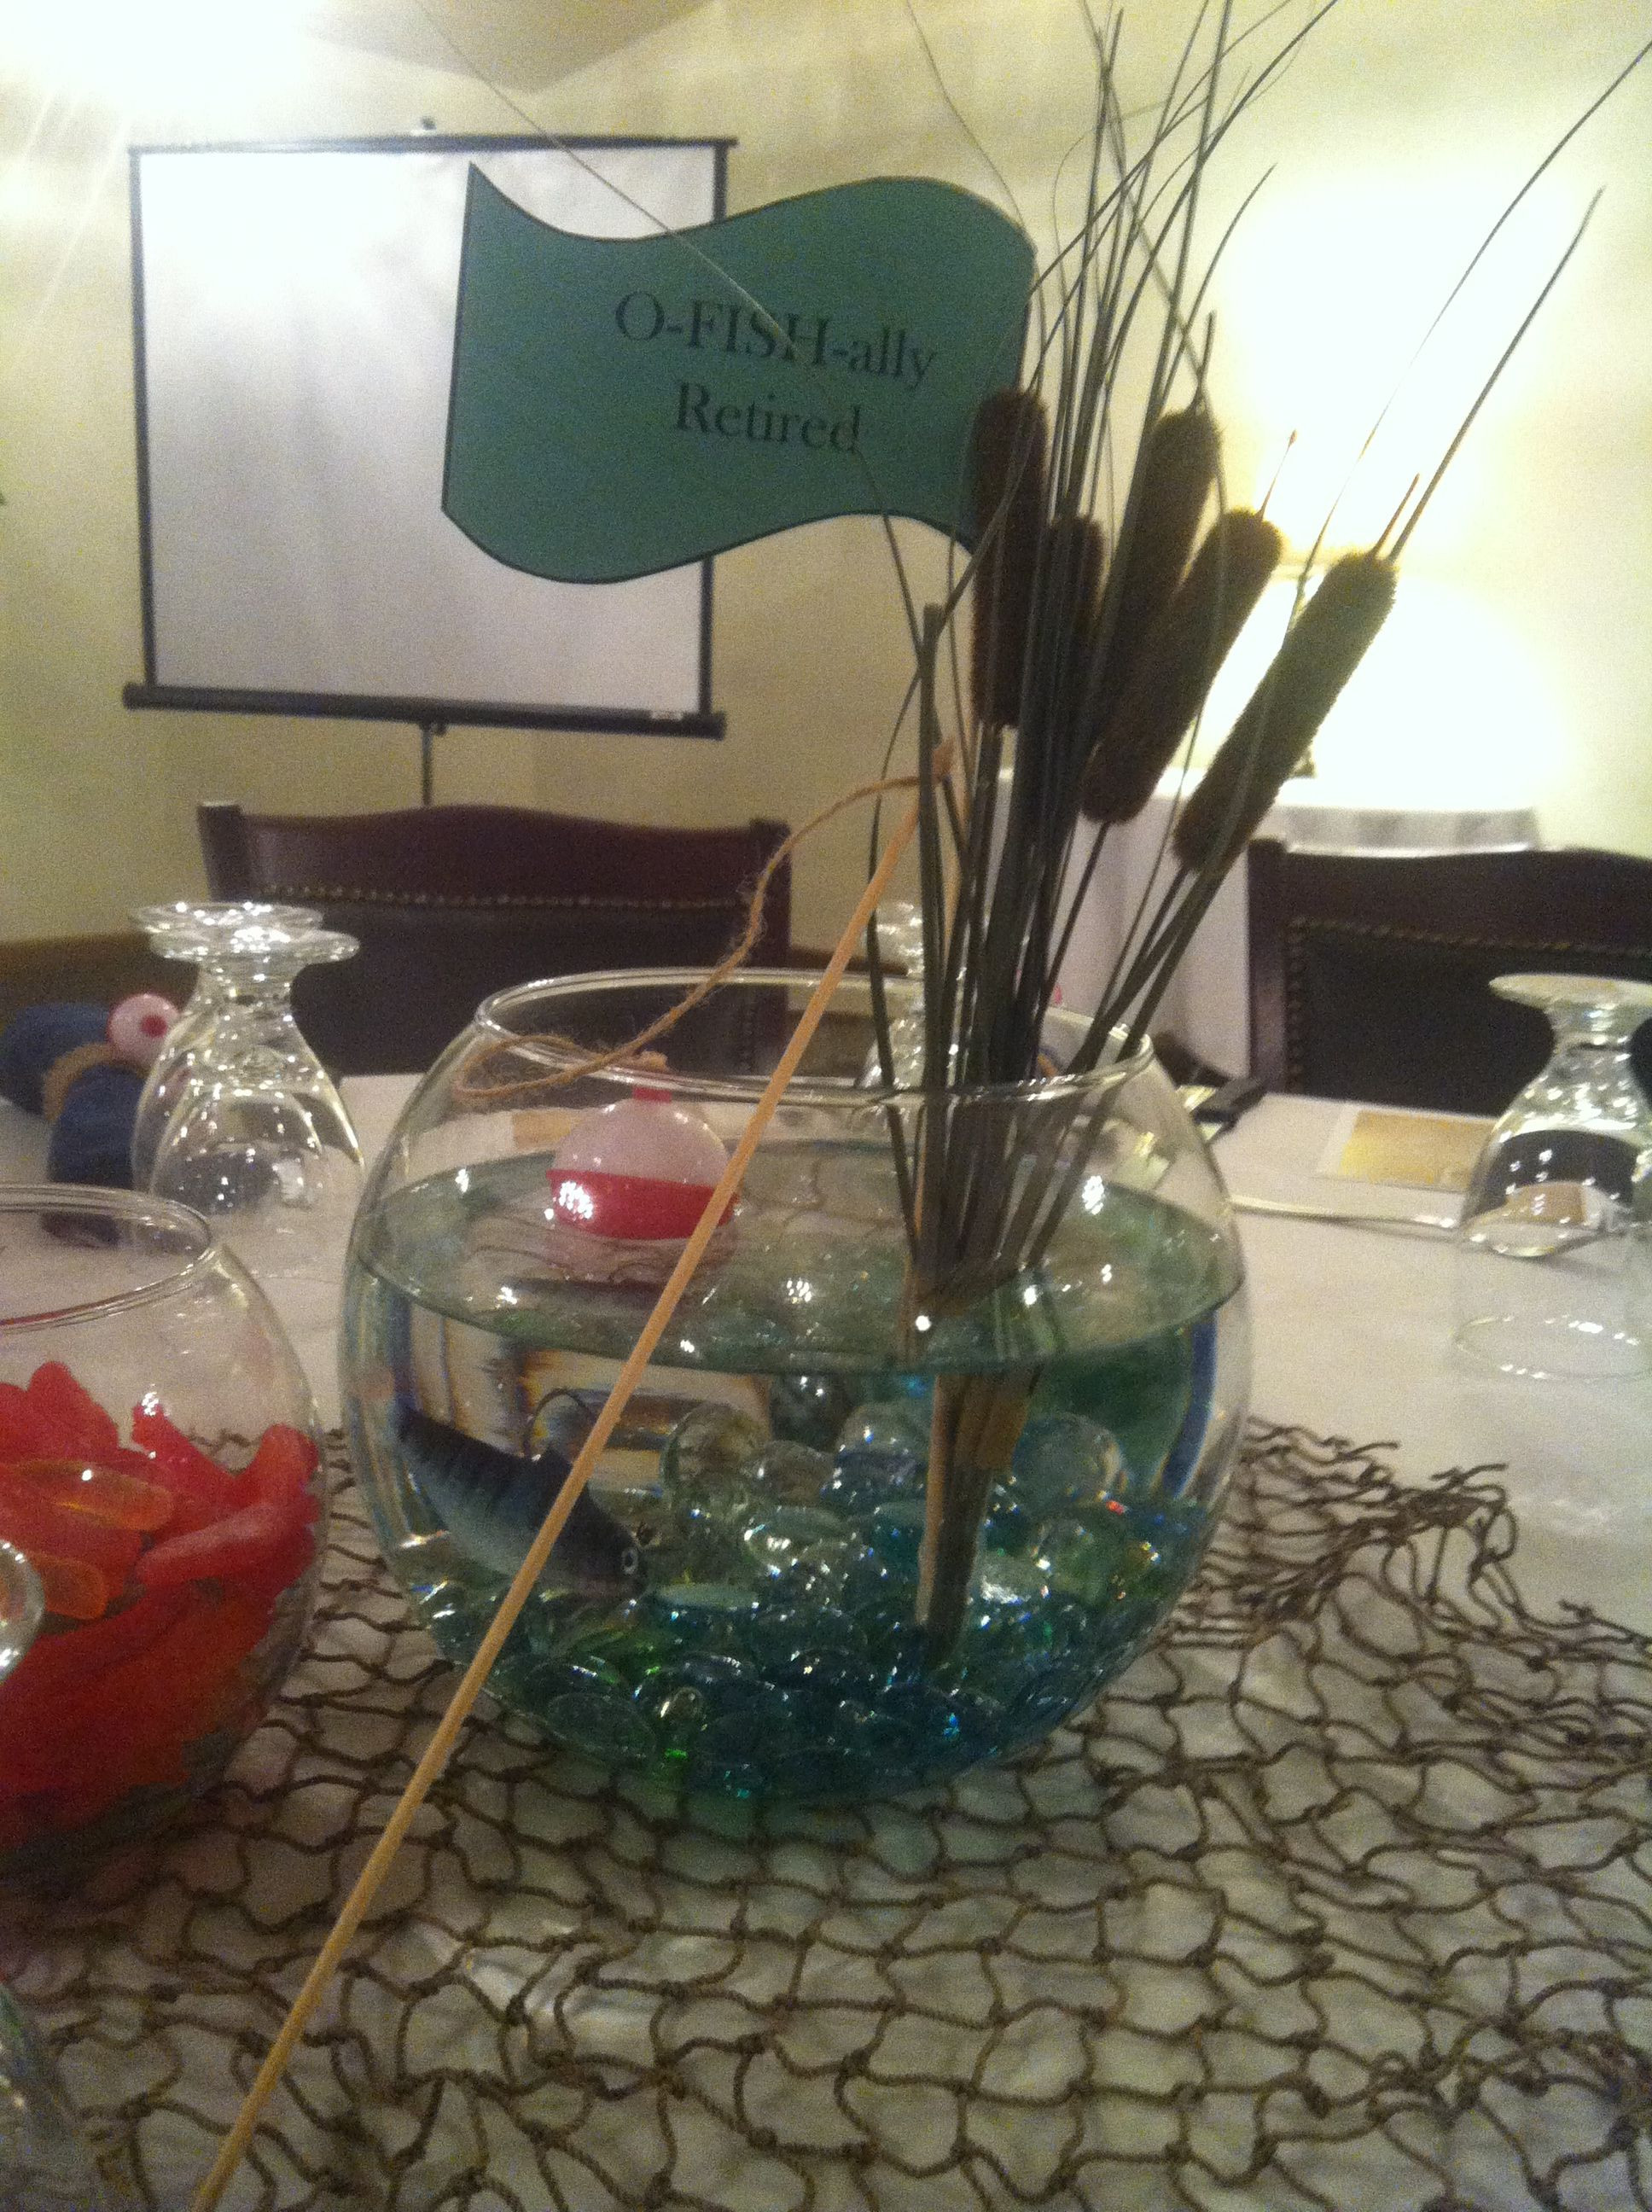 Fishing Retirement Party Ideas
 O Fish ally retired centerpieces I made Leann Bauer